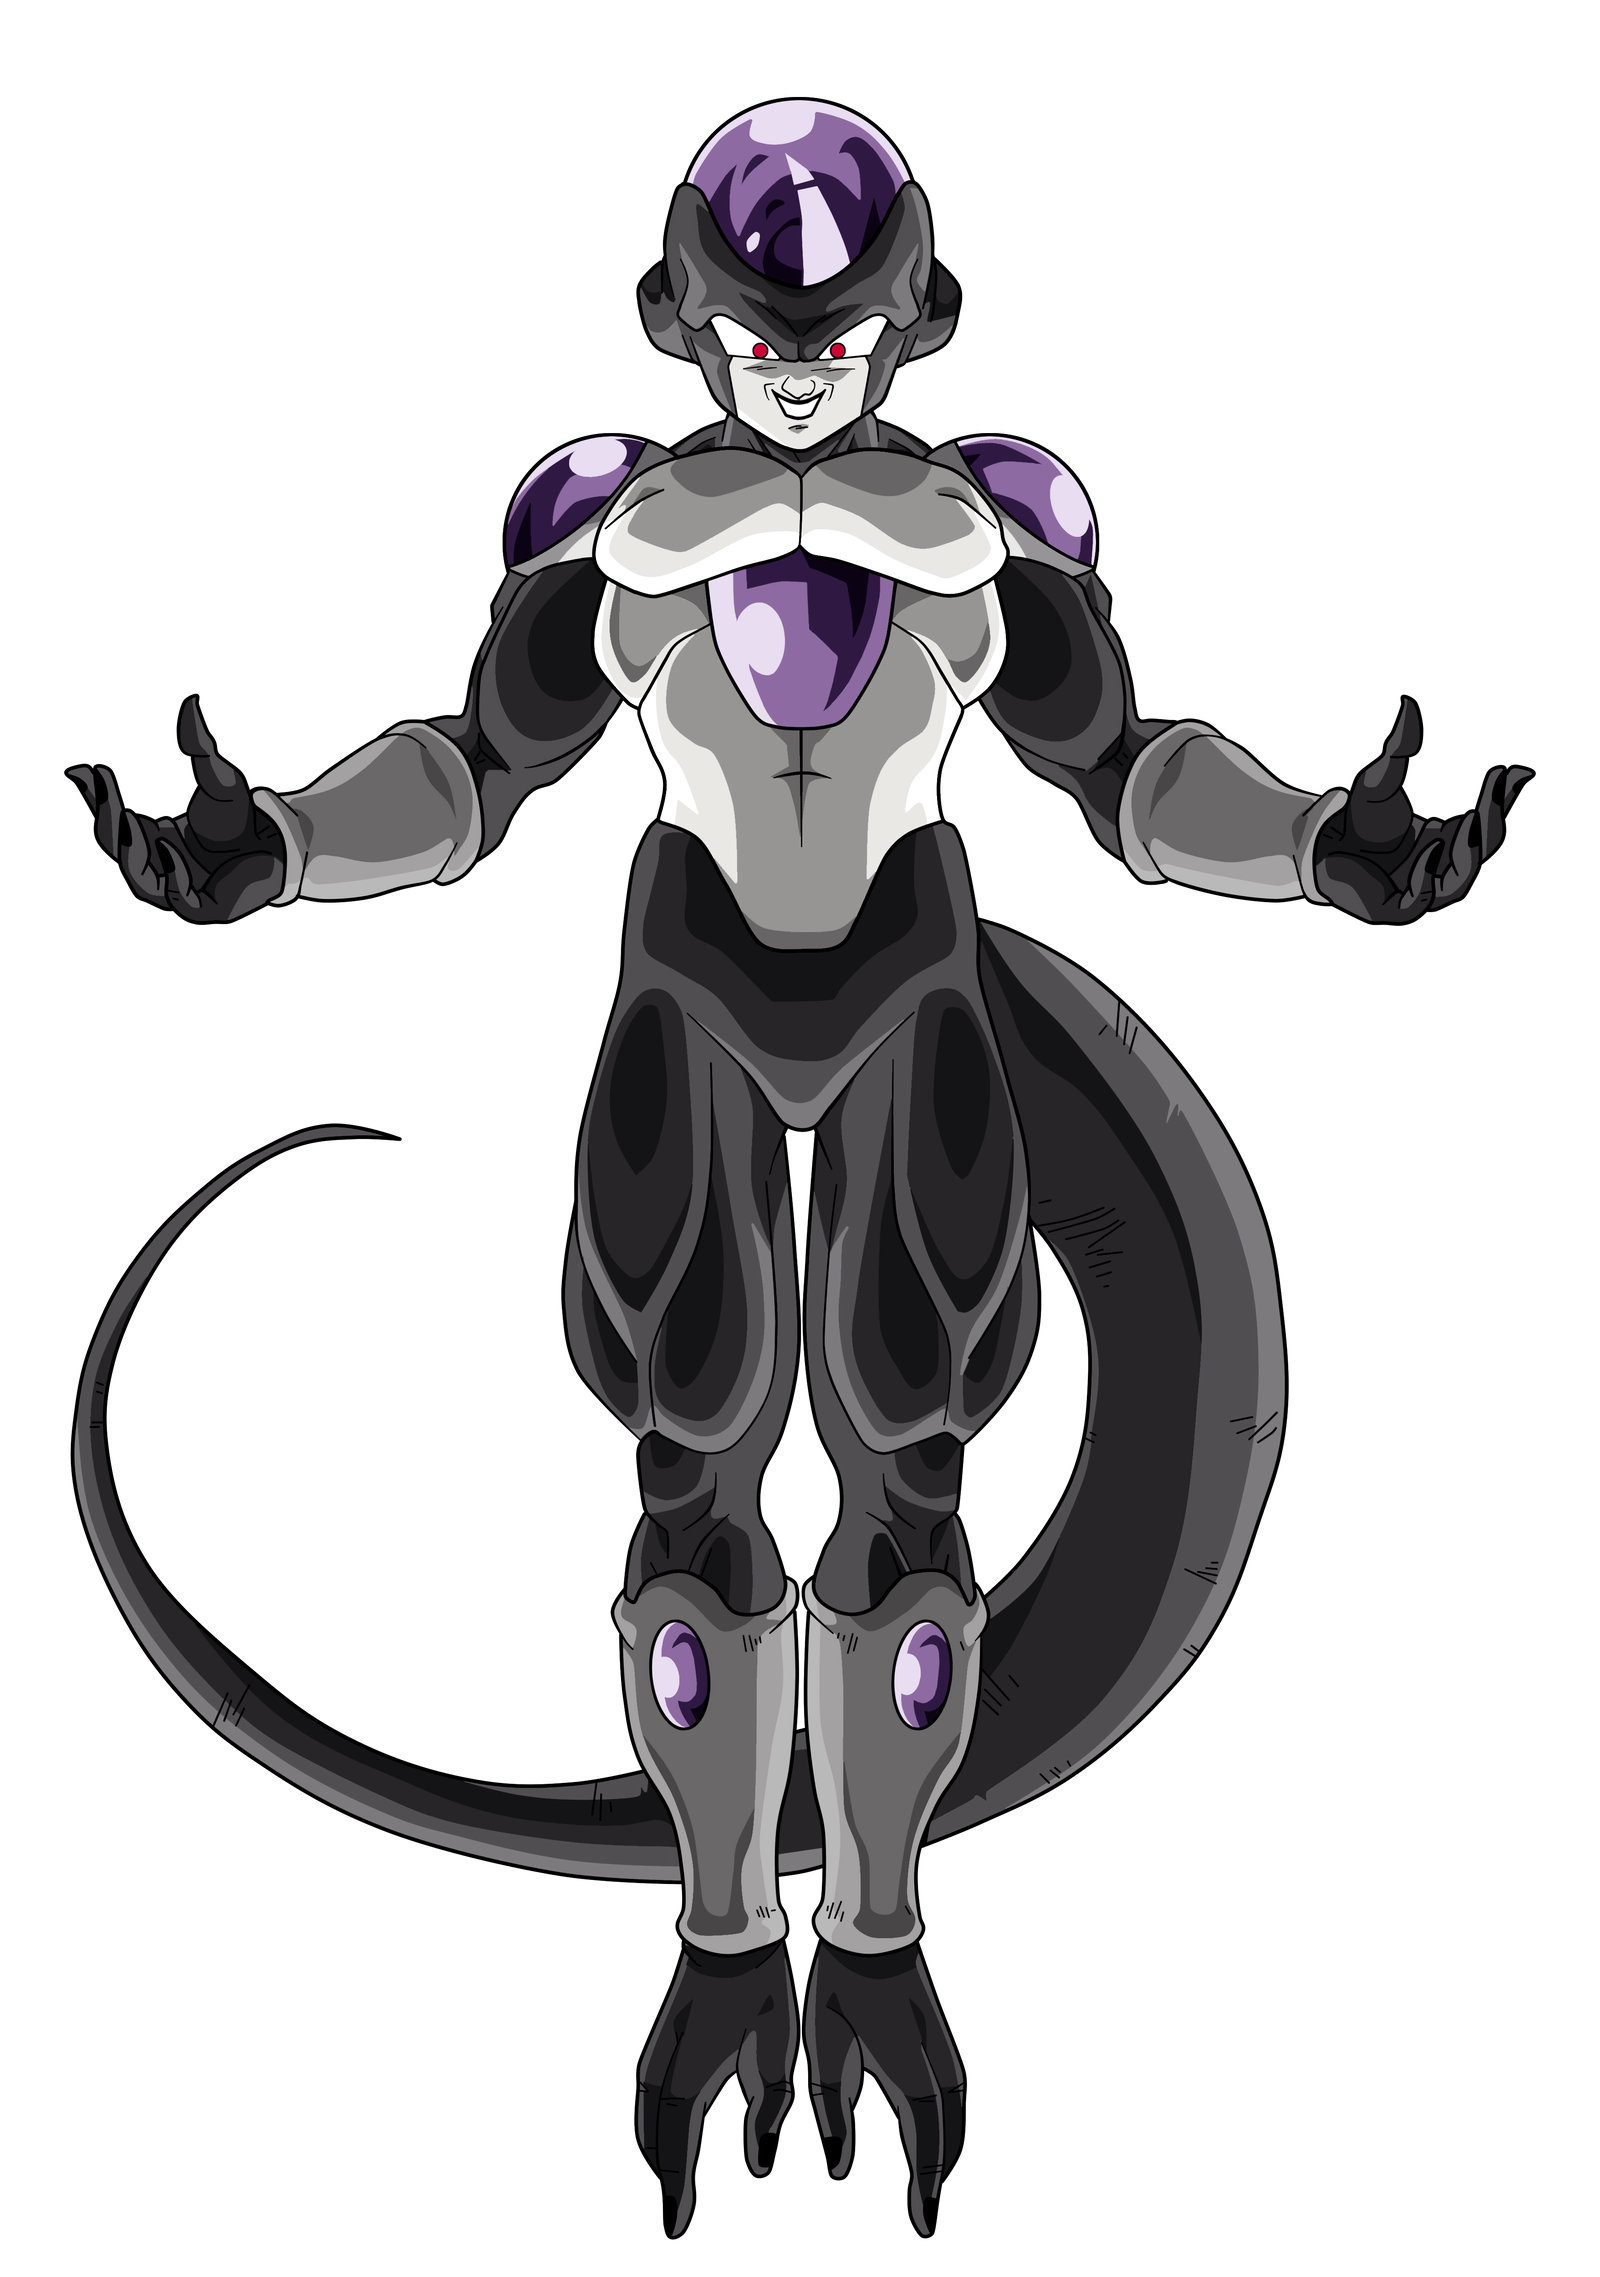 black_frieza_by_obsolete00_dfbhmvk-fullview.png